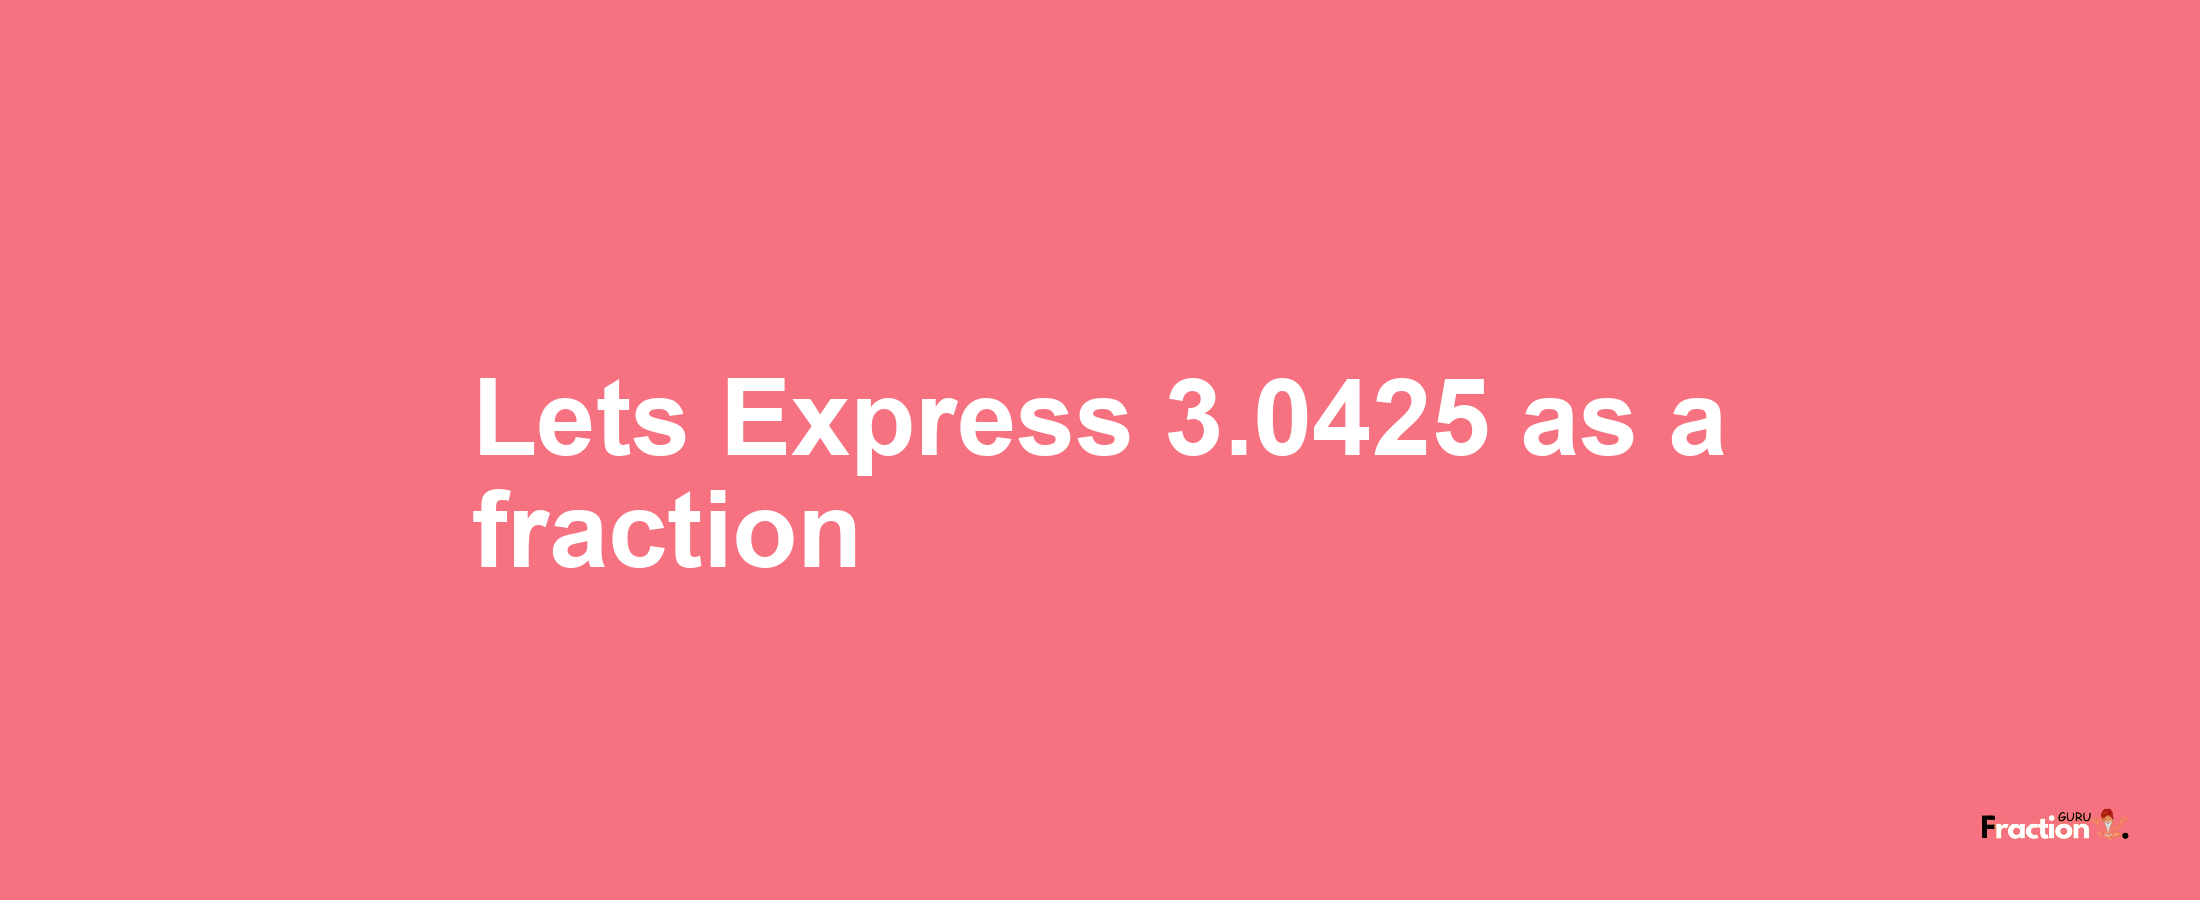 Lets Express 3.0425 as afraction